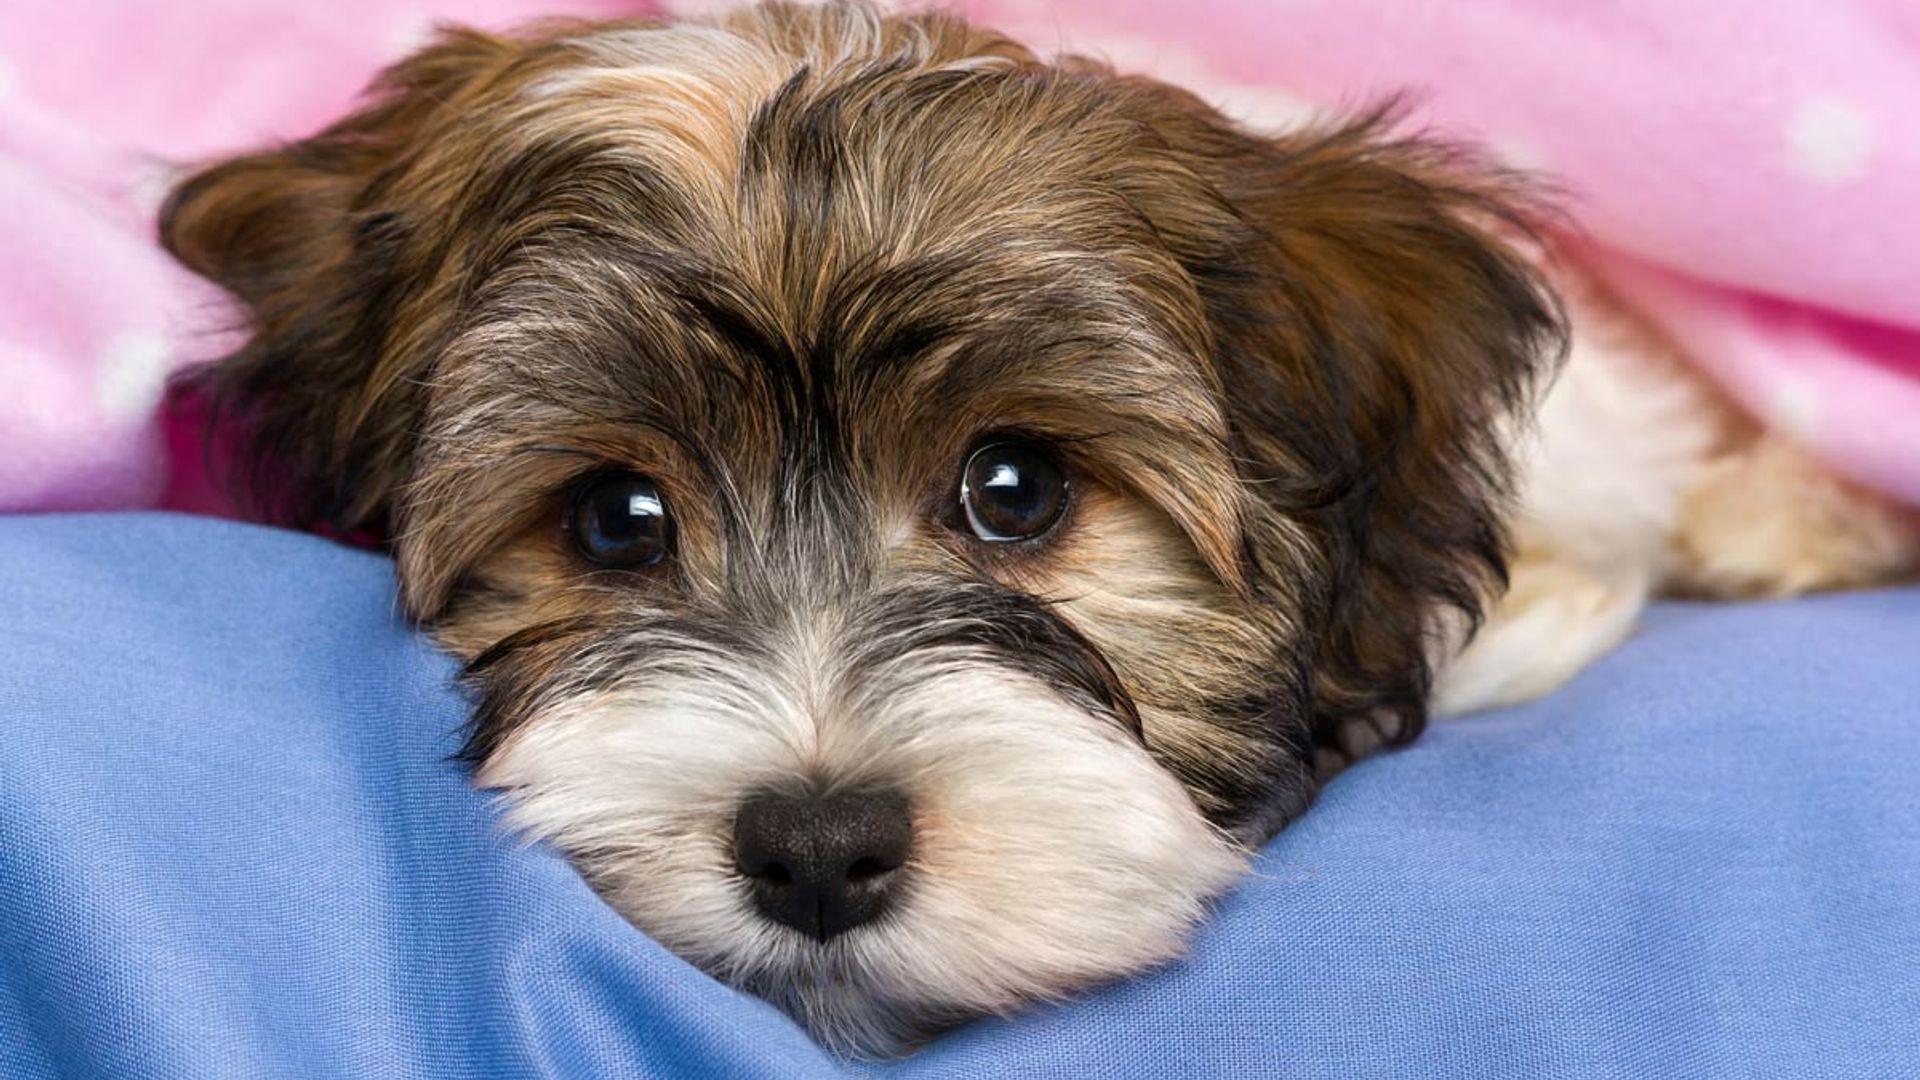 can dogs tell if your sad